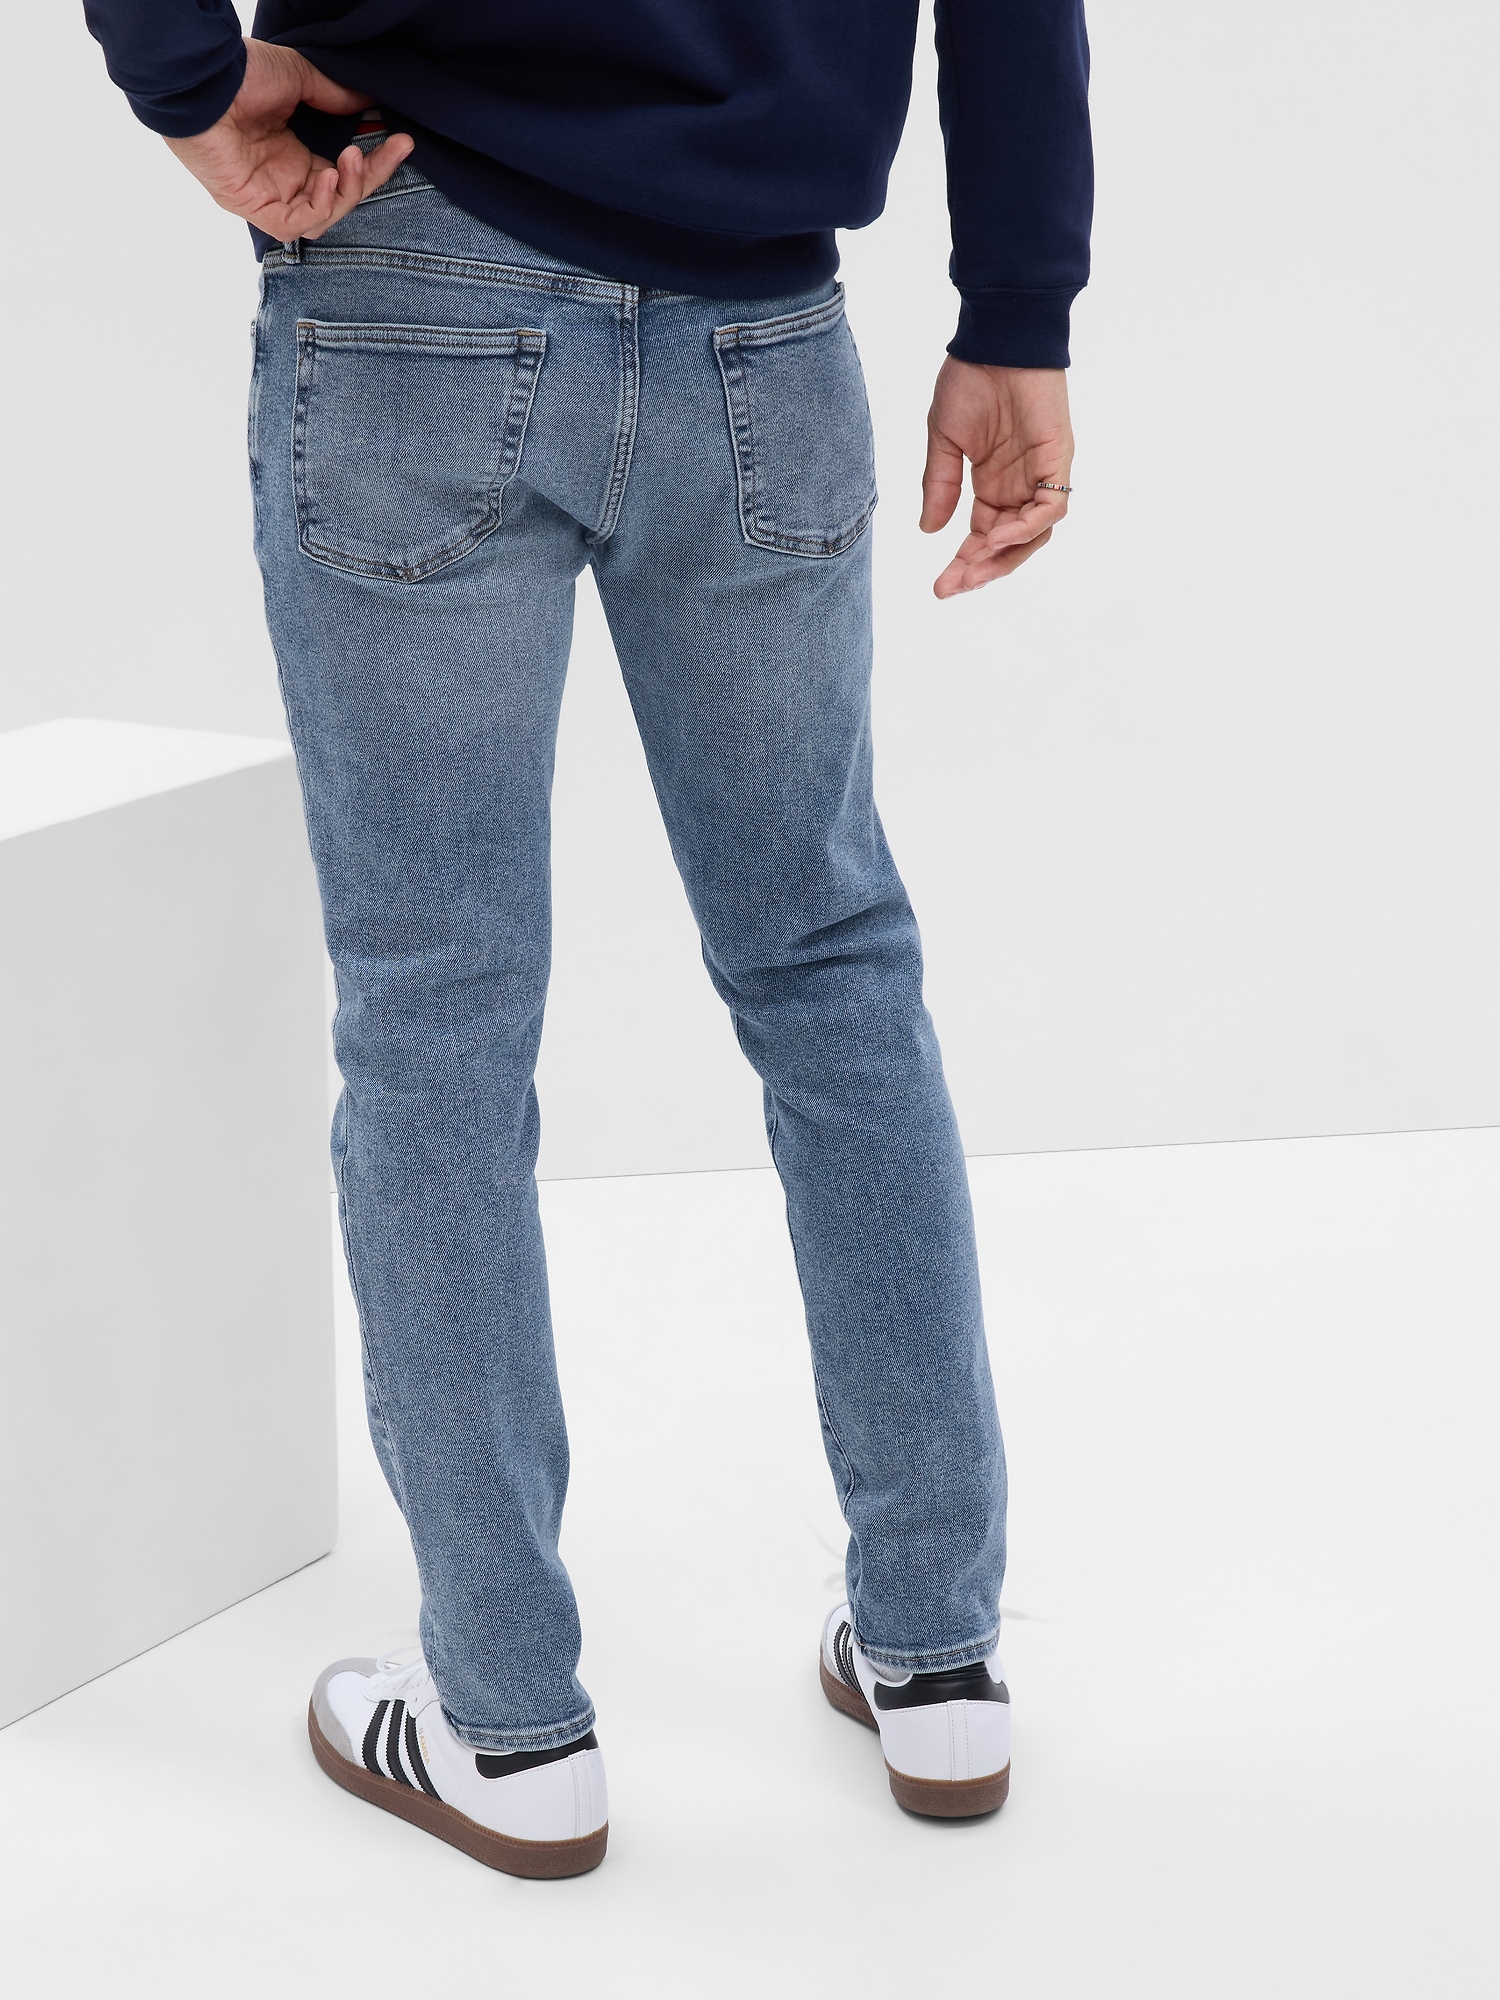 Buy Gap Stretch Slim Fit Soft Wear Jeans from the Gap online shop